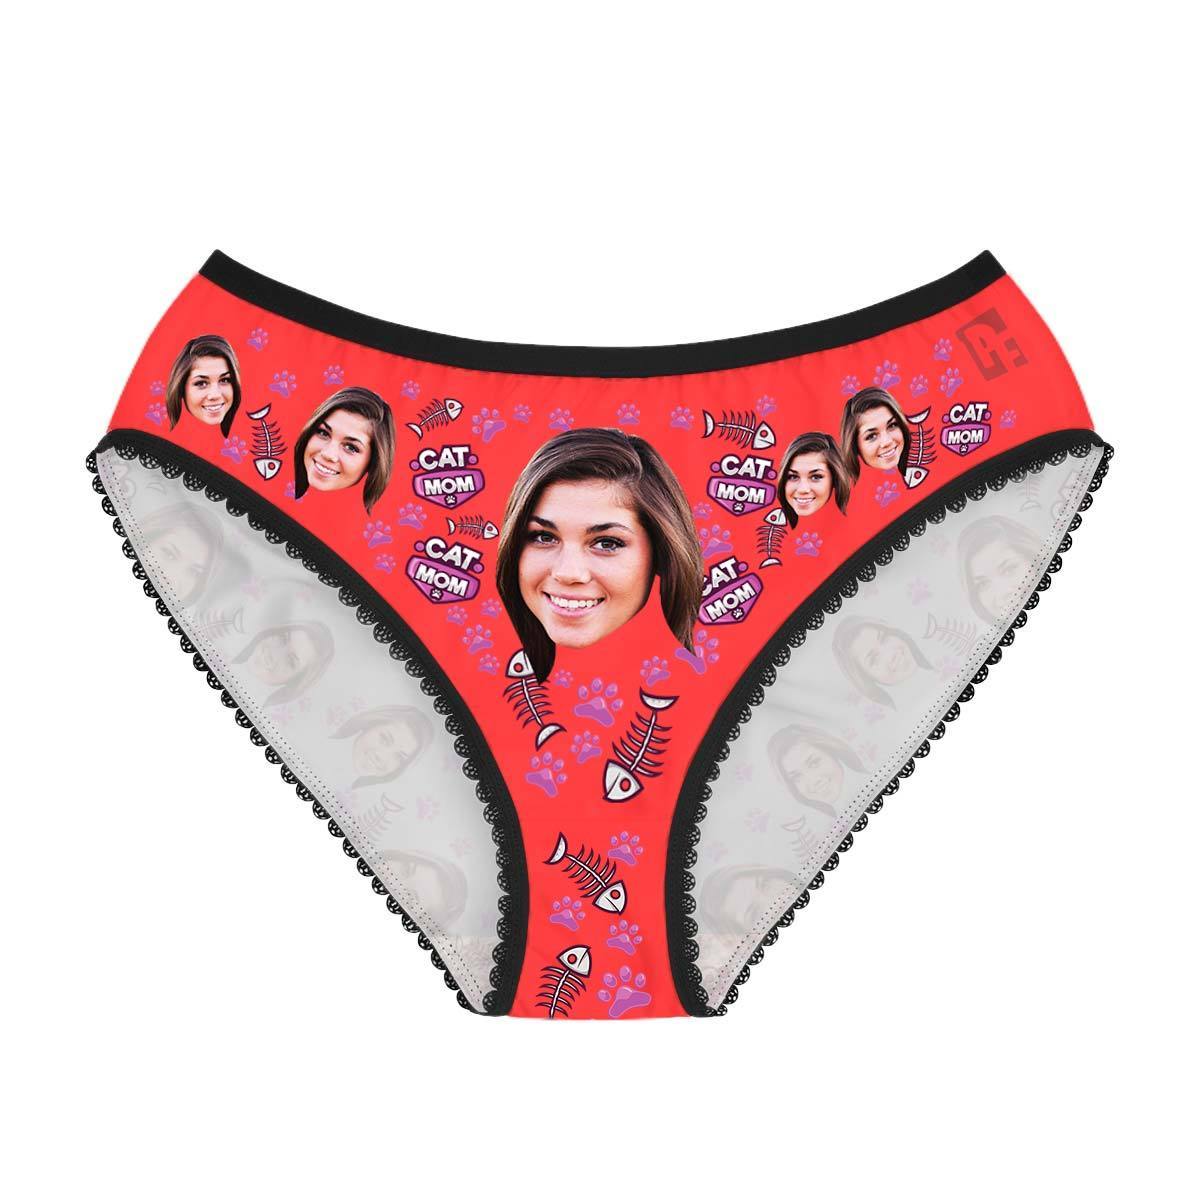 Red Cat Mom women's underwear briefs personalized with photo printed on them